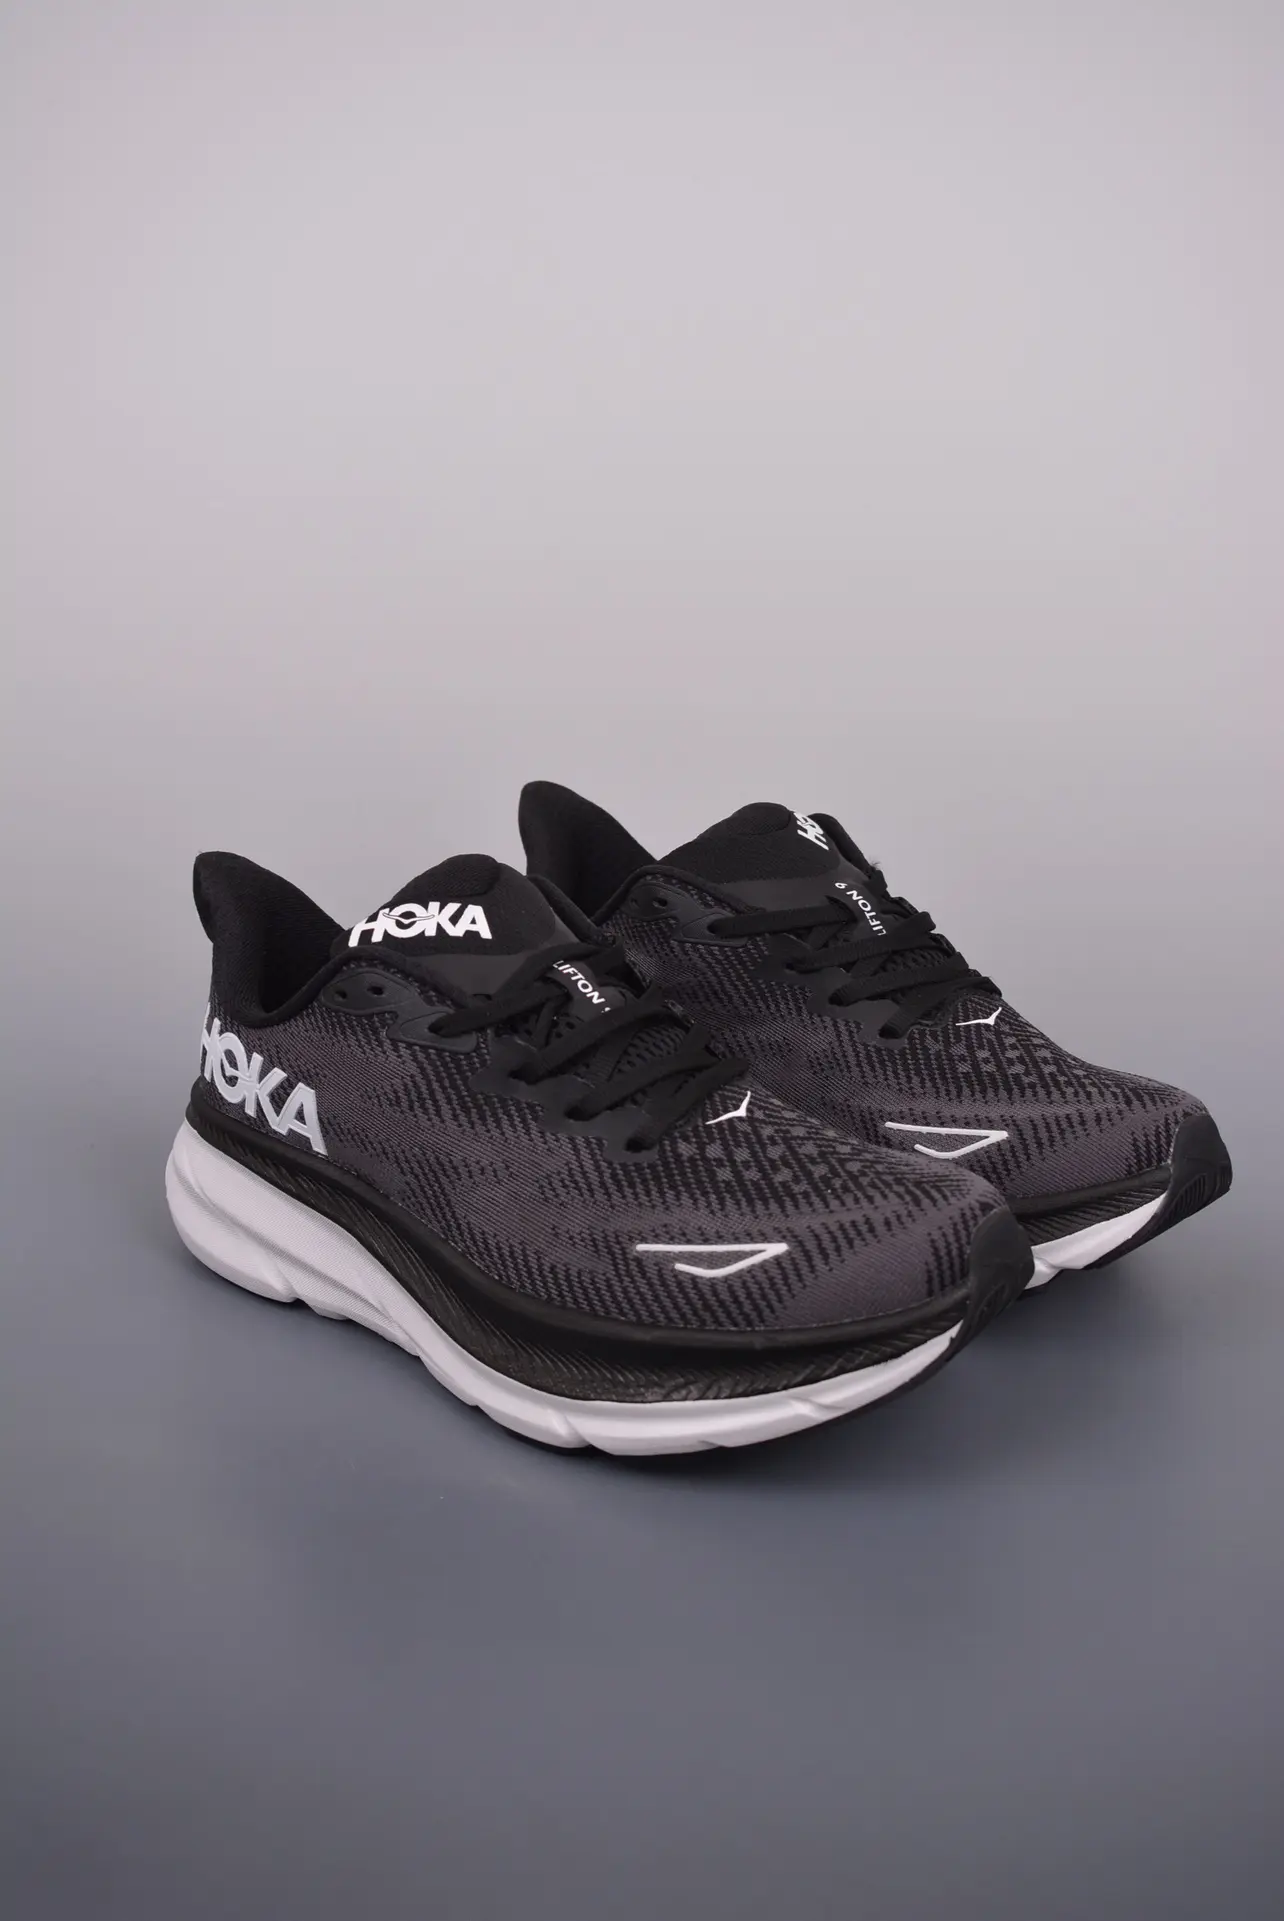 YASSW | Hoka vs. On Cloud Shoes: Choosing the Right Fit for Nurses, Walking, and Standing All Day